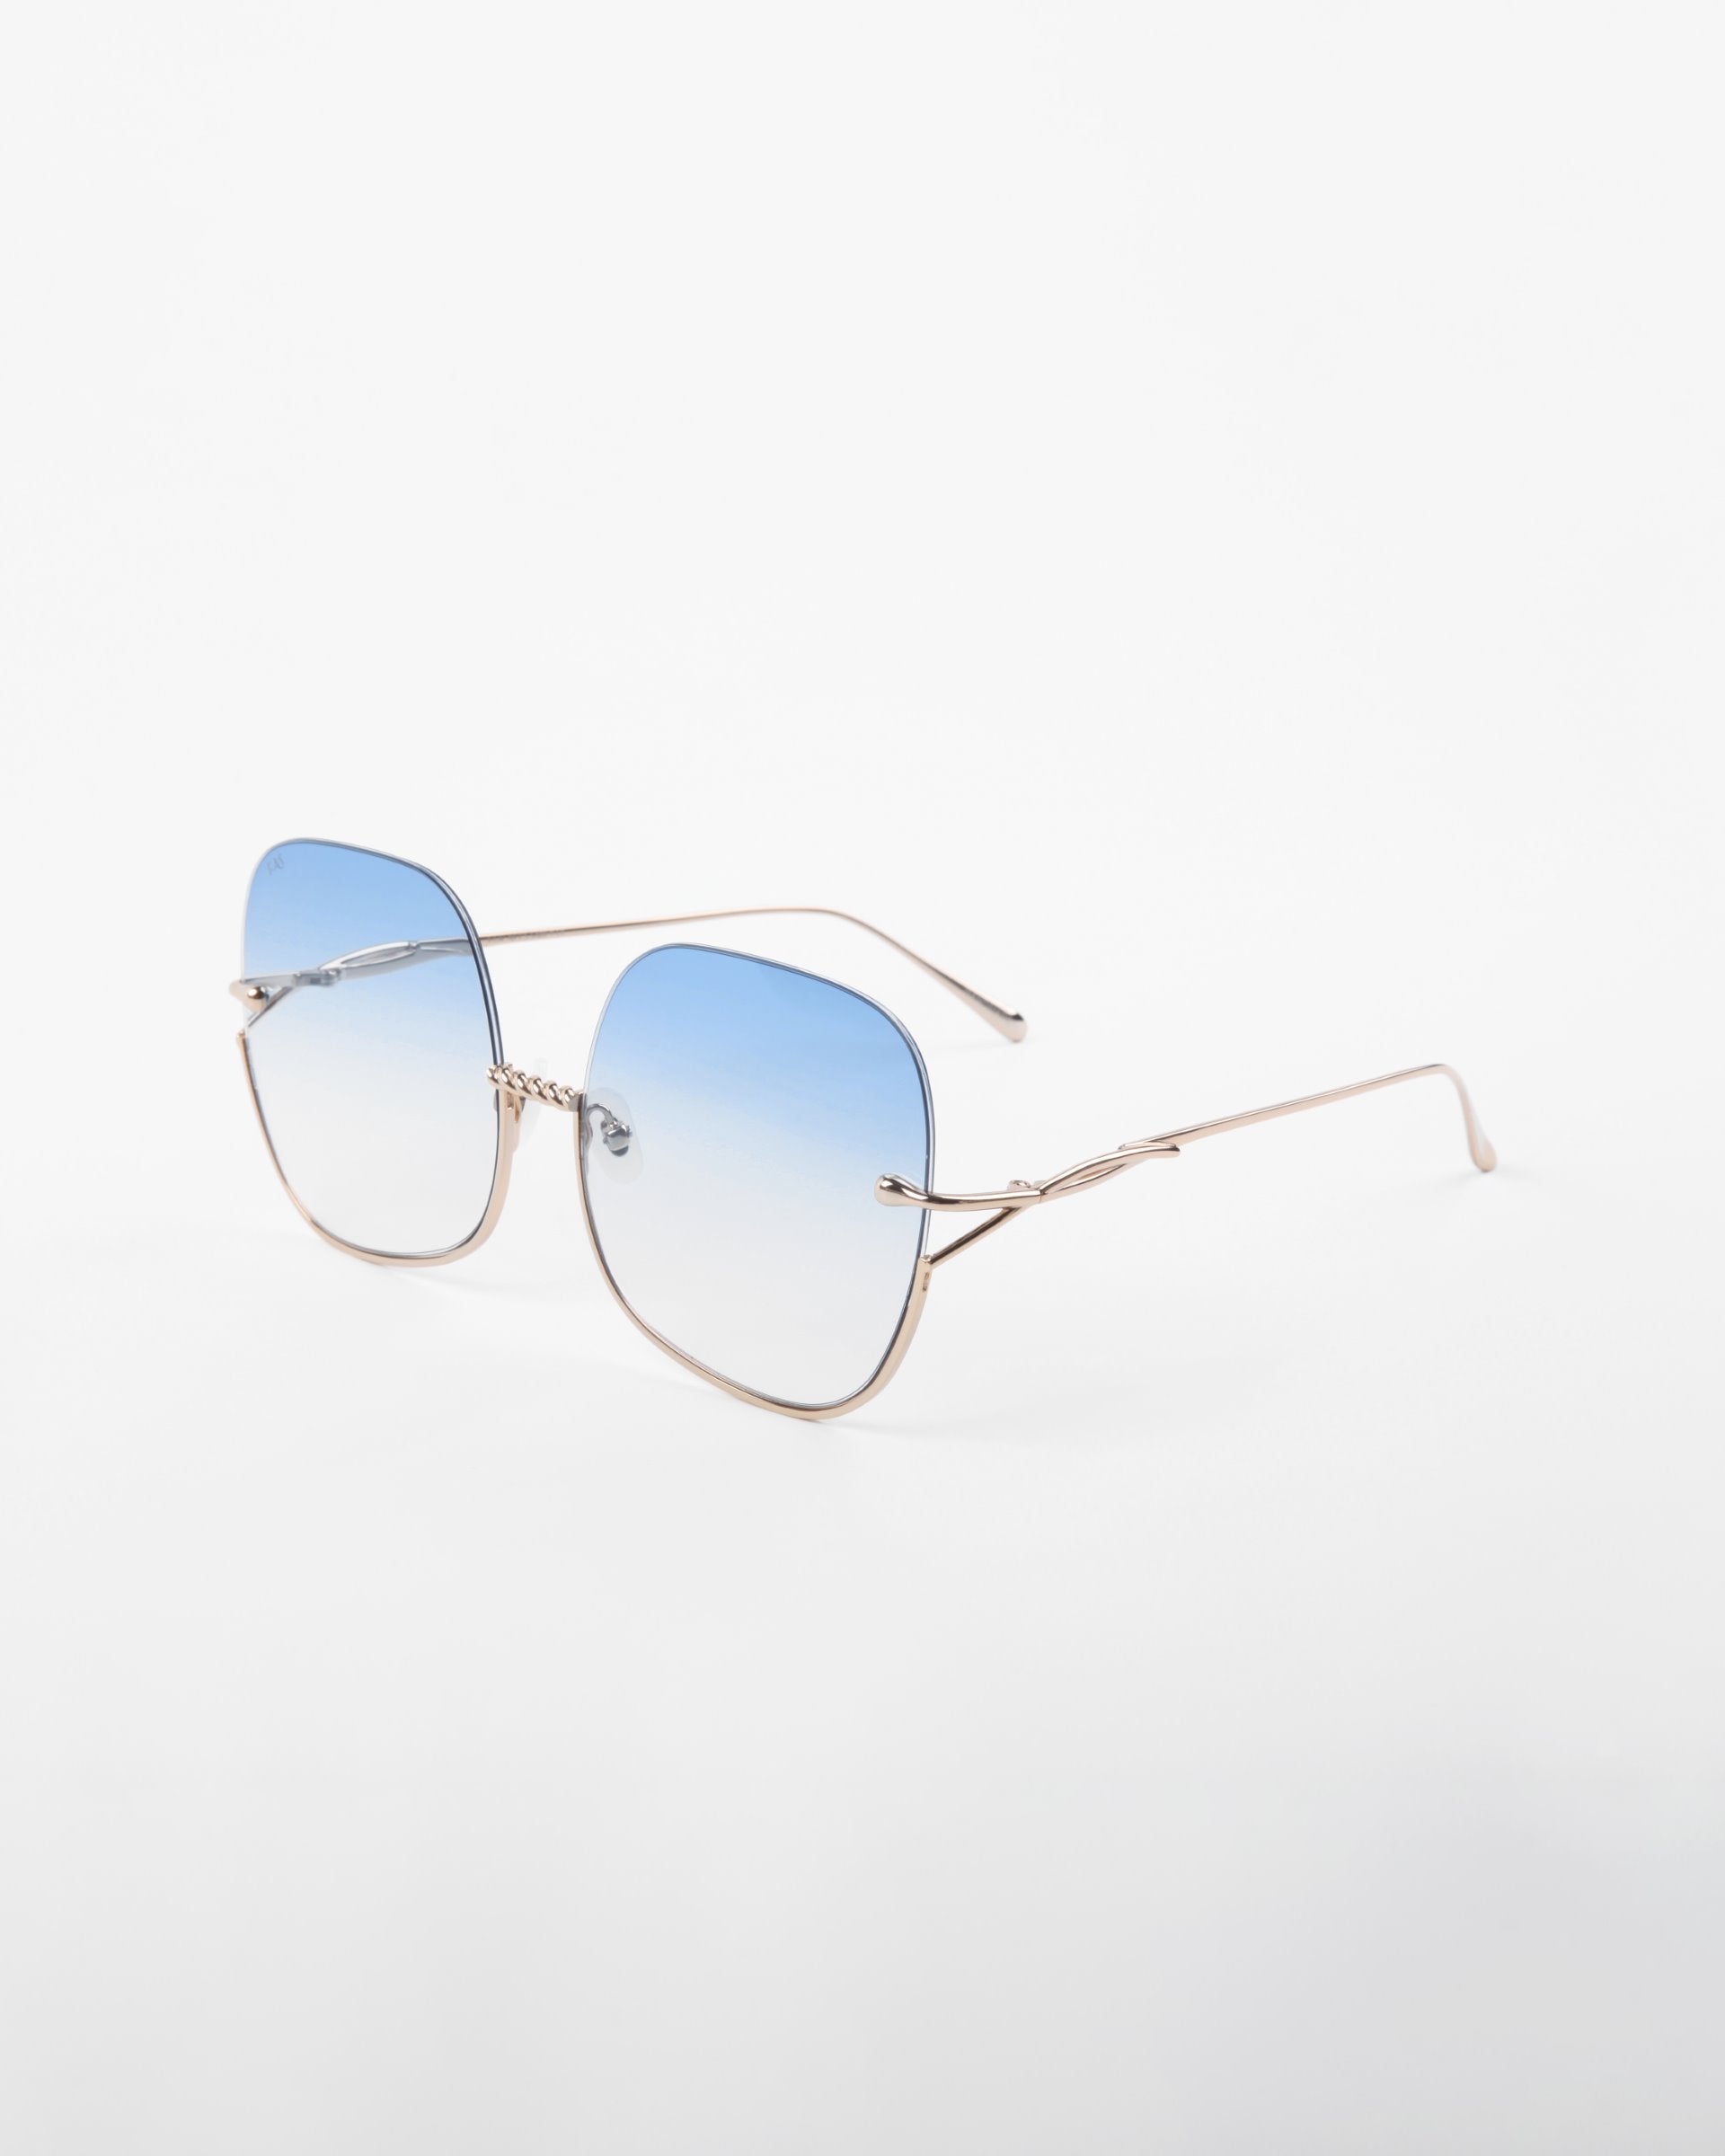 A pair of Duchess sunglasses by For Art&#39;s Sake® with blue gradient, shatter-resistant lenses and thin, handmade gold-plated frames. These stylish sunglasses offer UVA &amp; UVB protection and are placed on a plain white background.